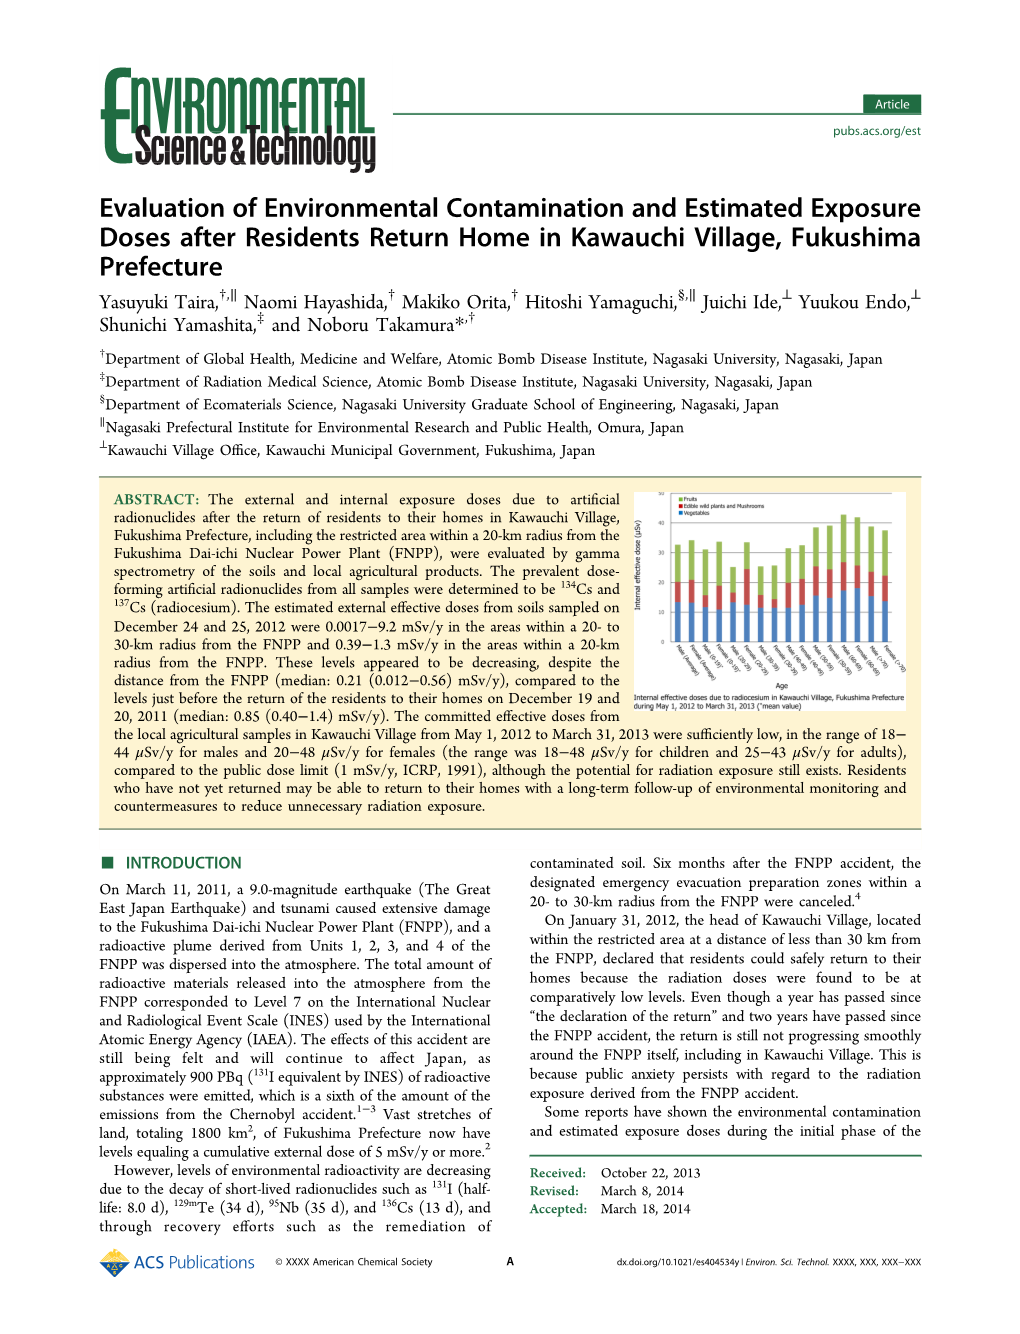 Evaluation of Environmental Contamination and Estimated